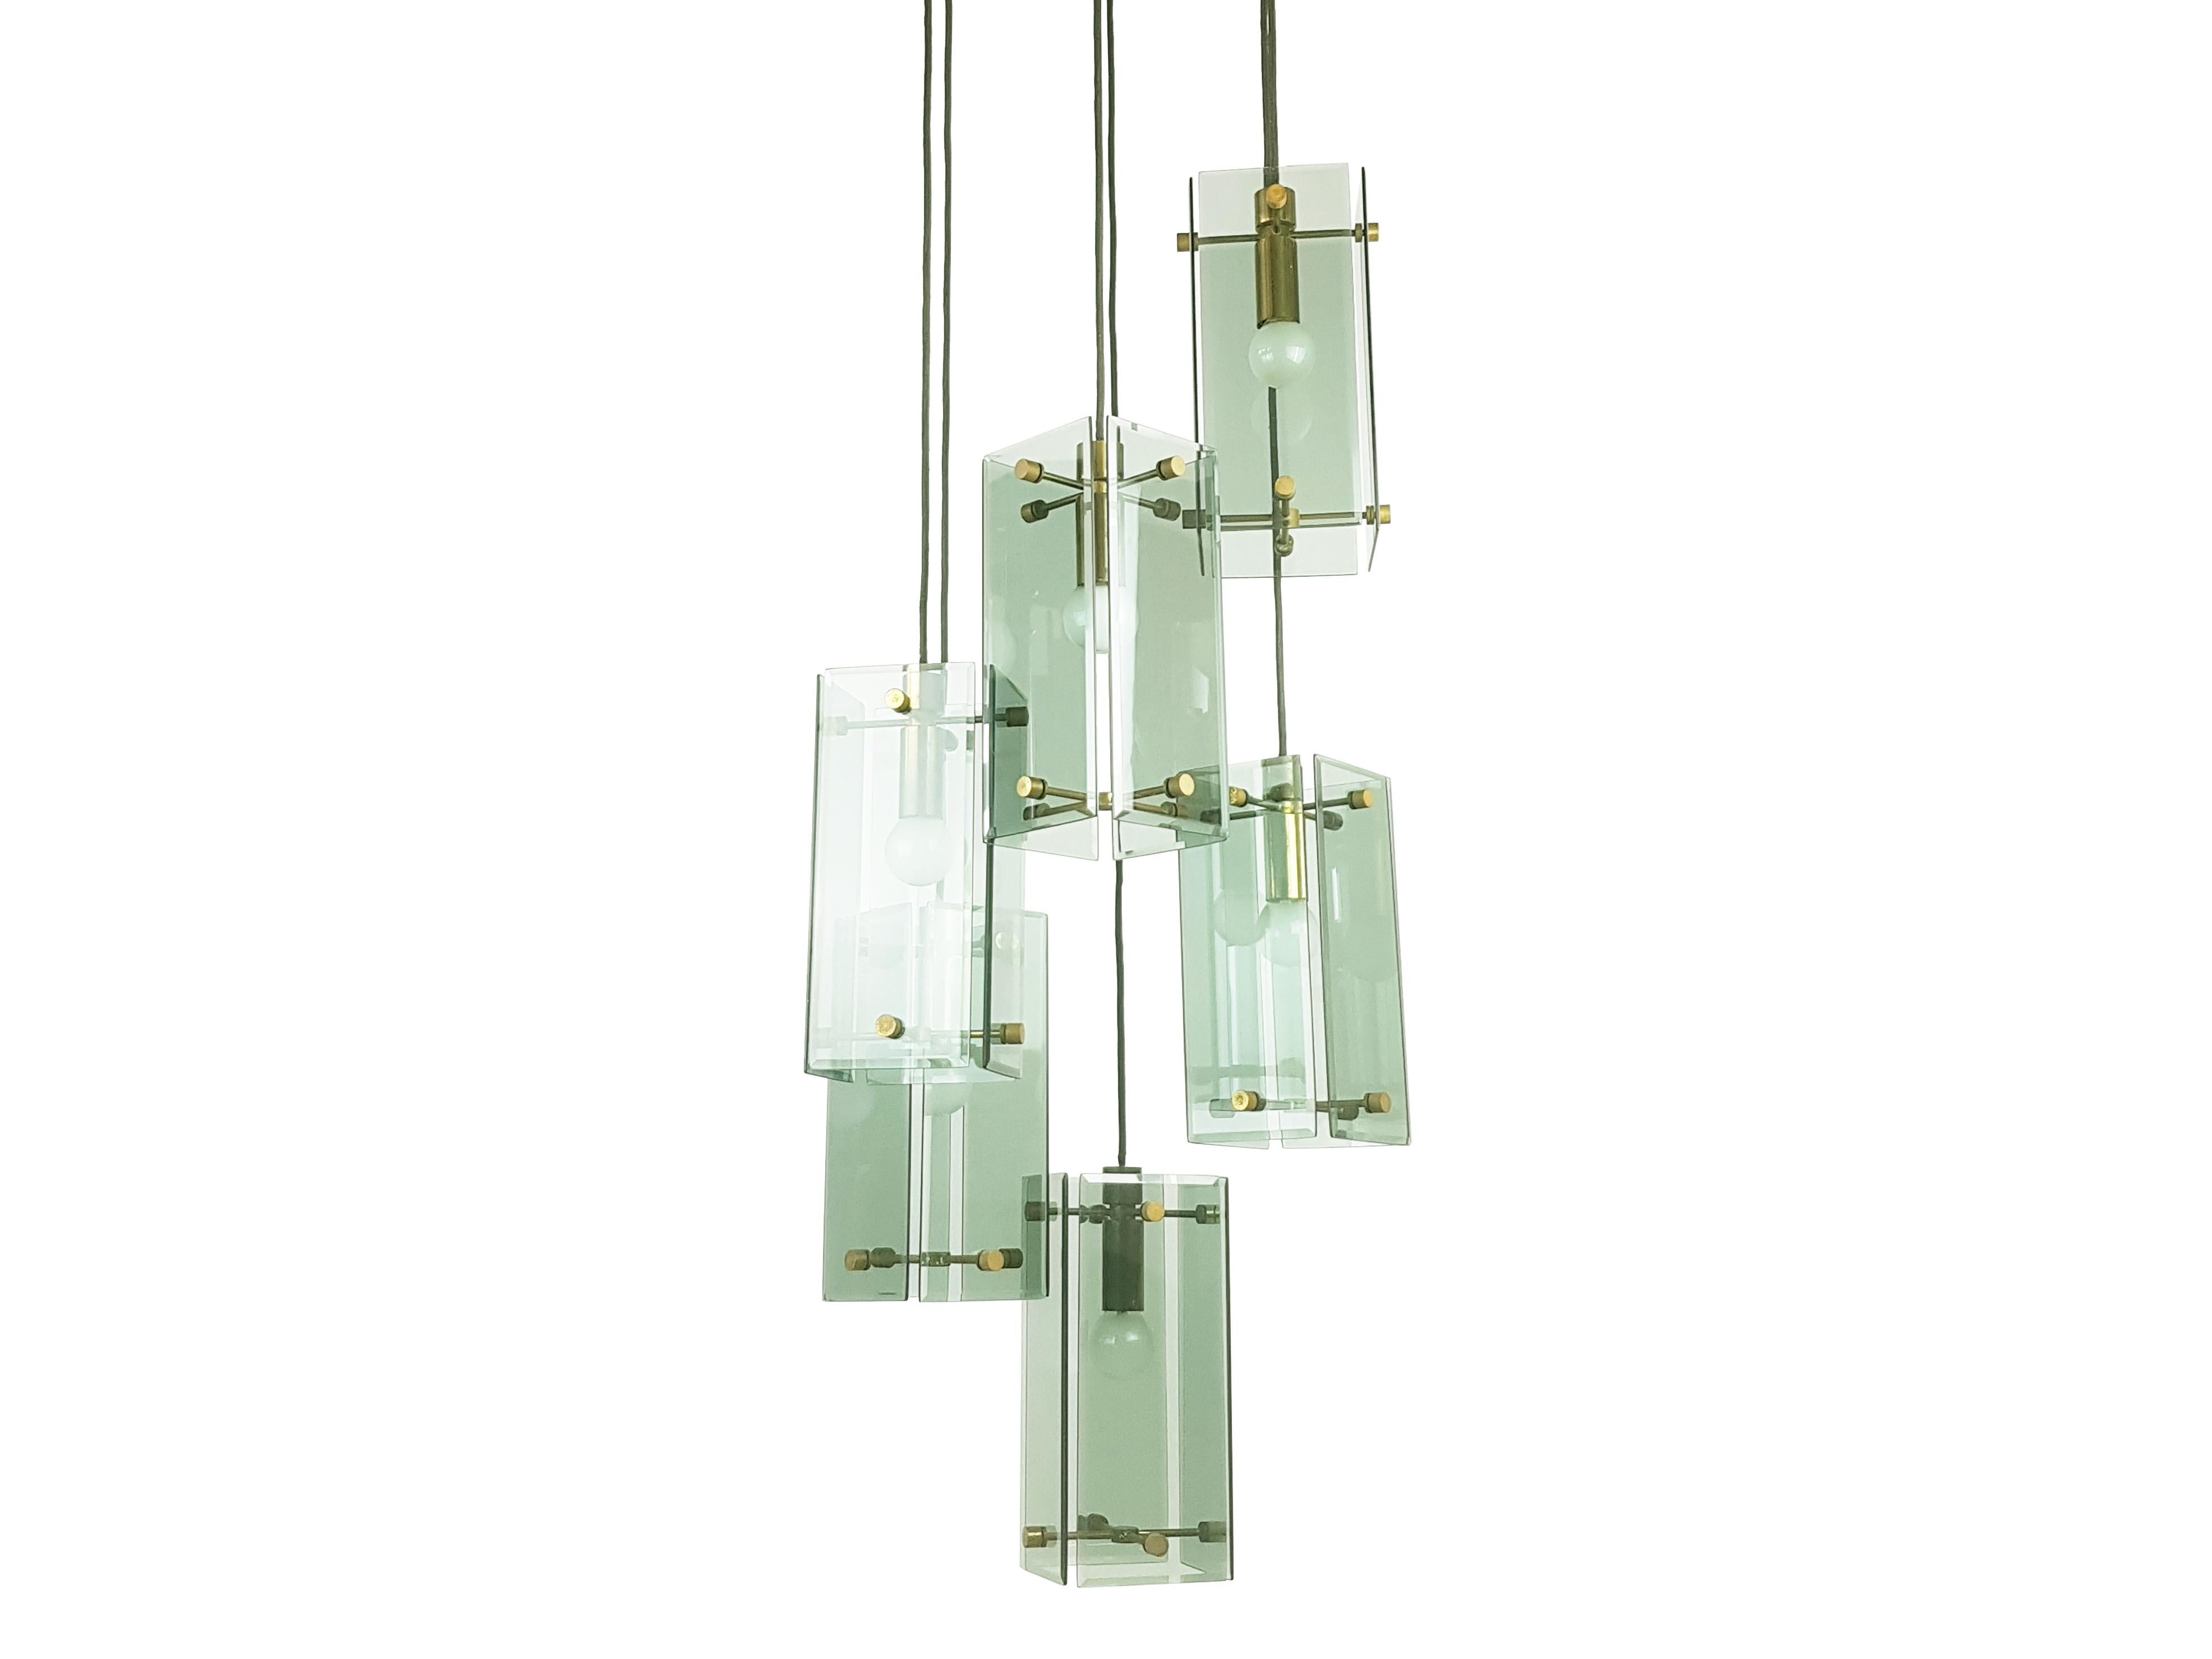 This elegant lamp was produced in Italy around the 1960s. It is composed by 6-lights pendants at different adjustable heights. Each element is made from a brass structure with 4 smoked glass shades. A teak wood and golden metal ceiling supports